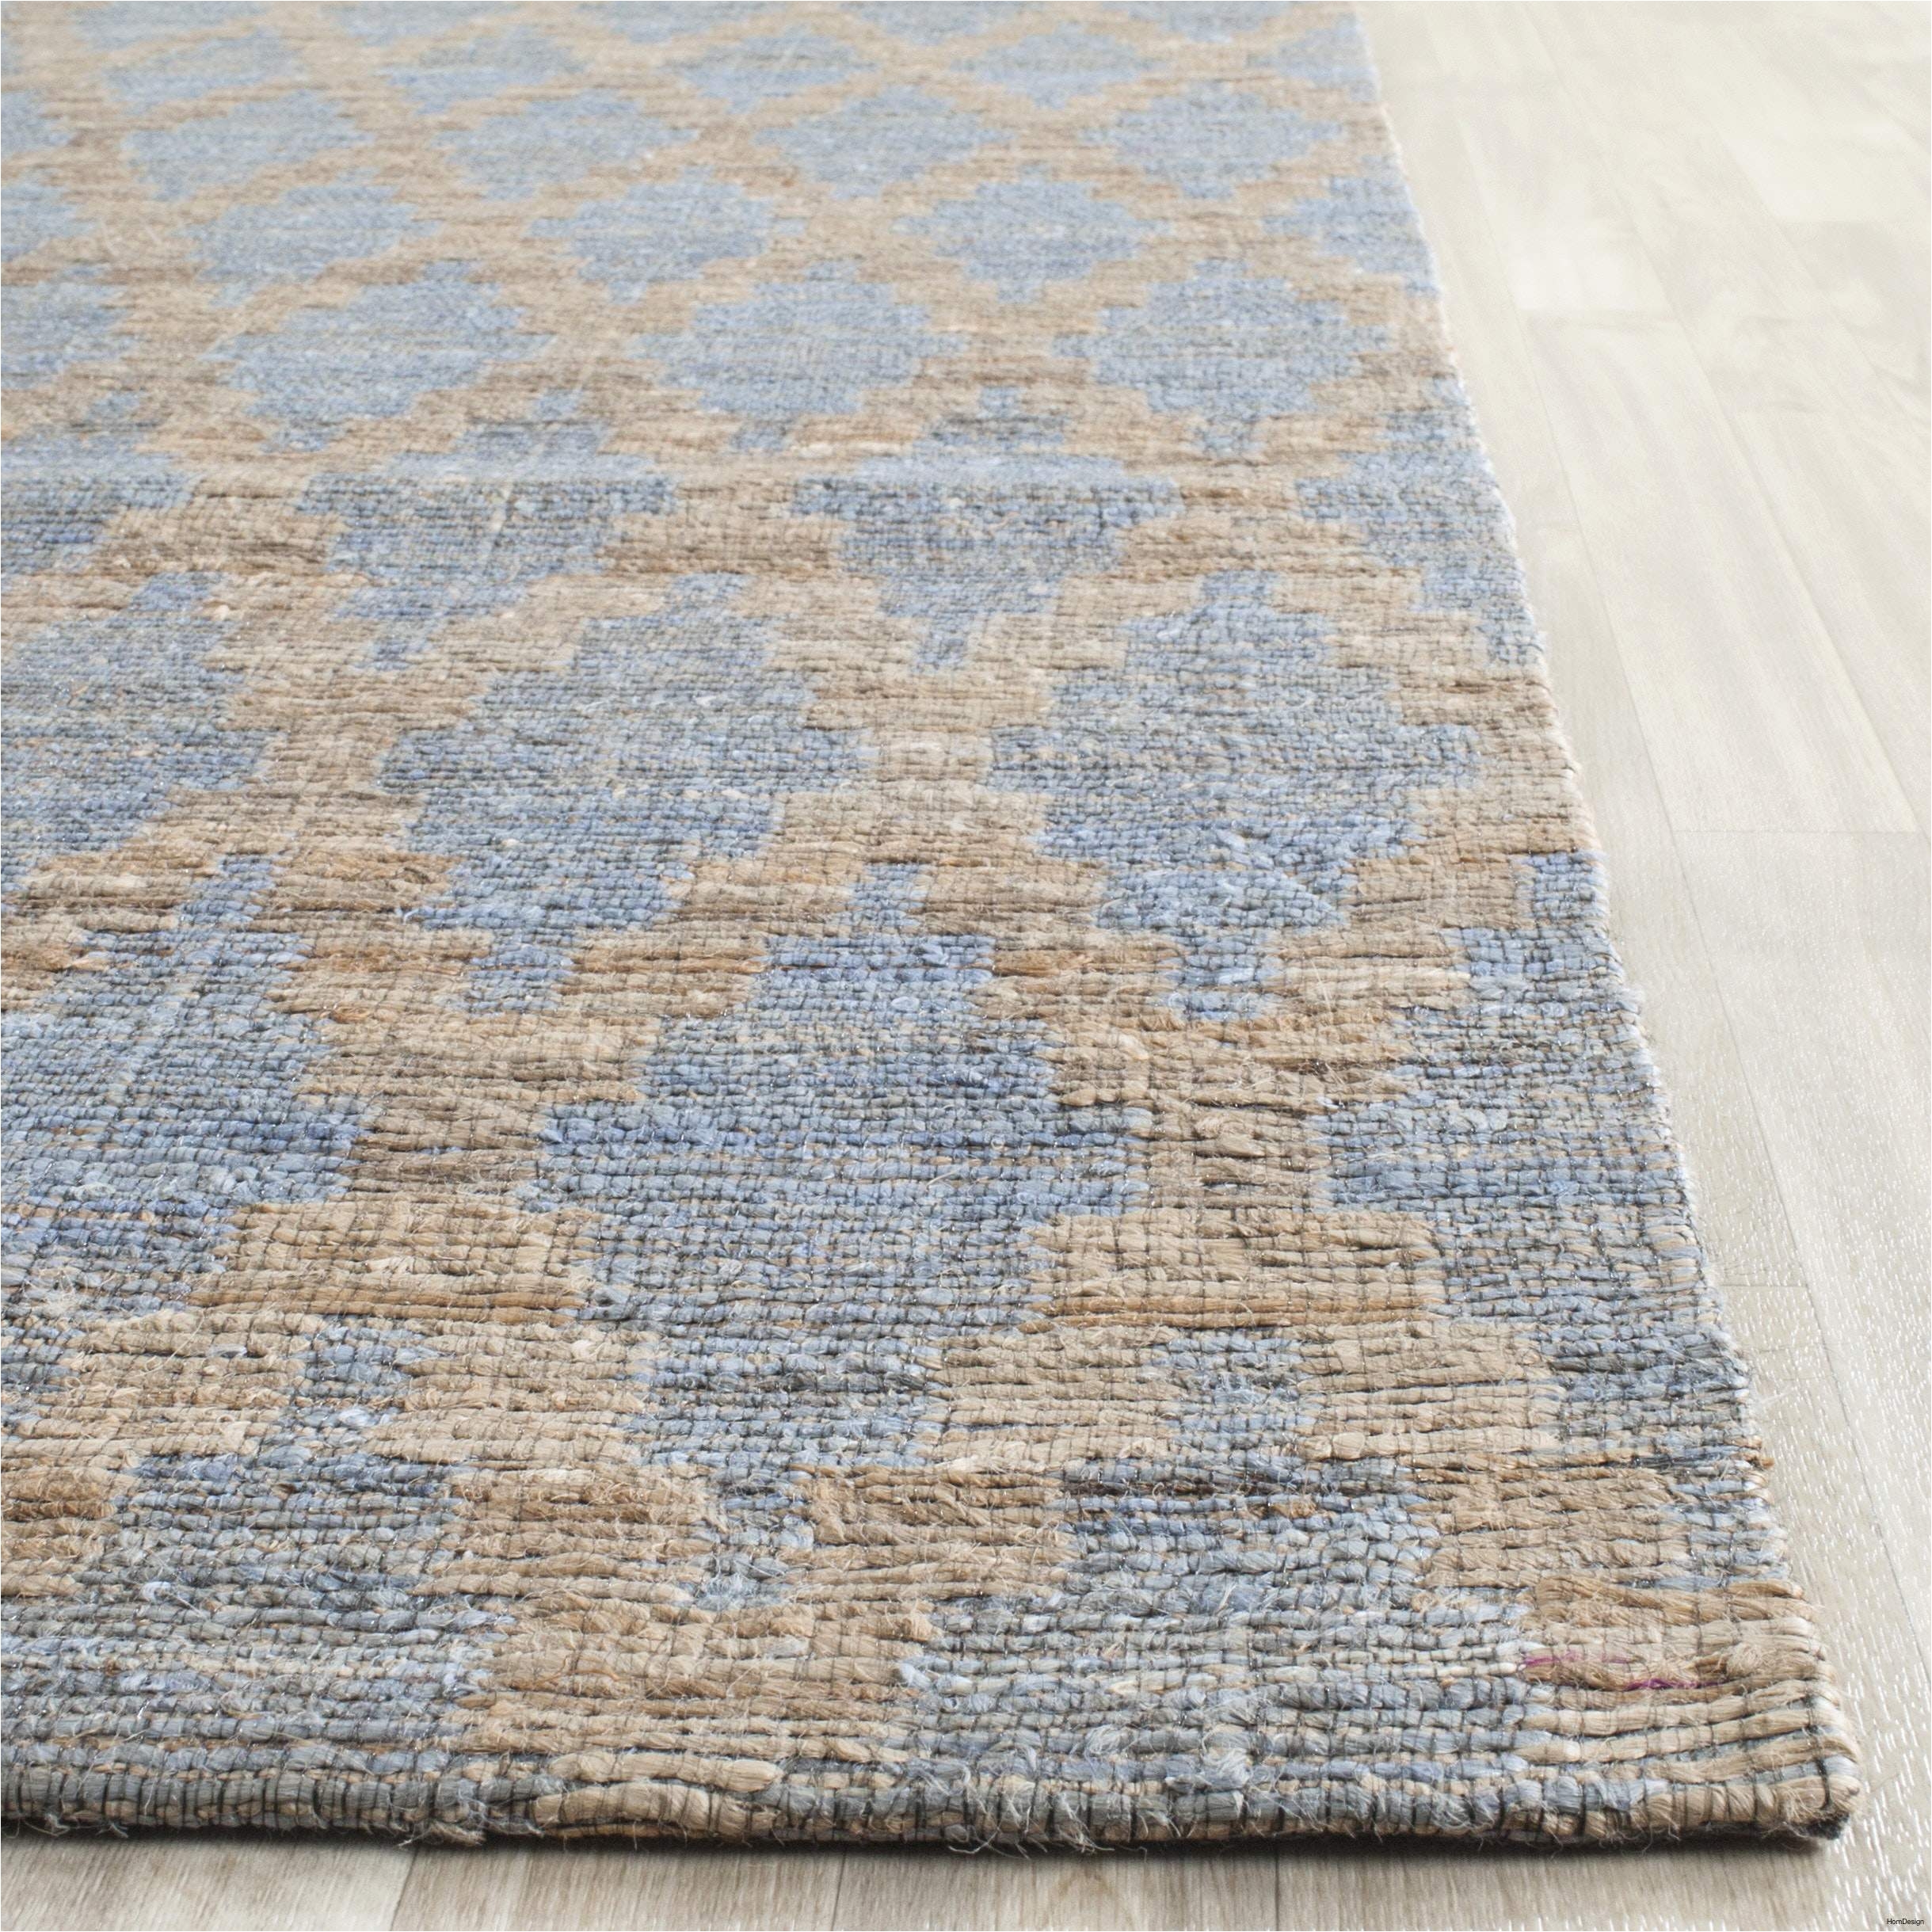 elegant area rugs fresh rugged new cheap area rugs blue rug as gold and white home